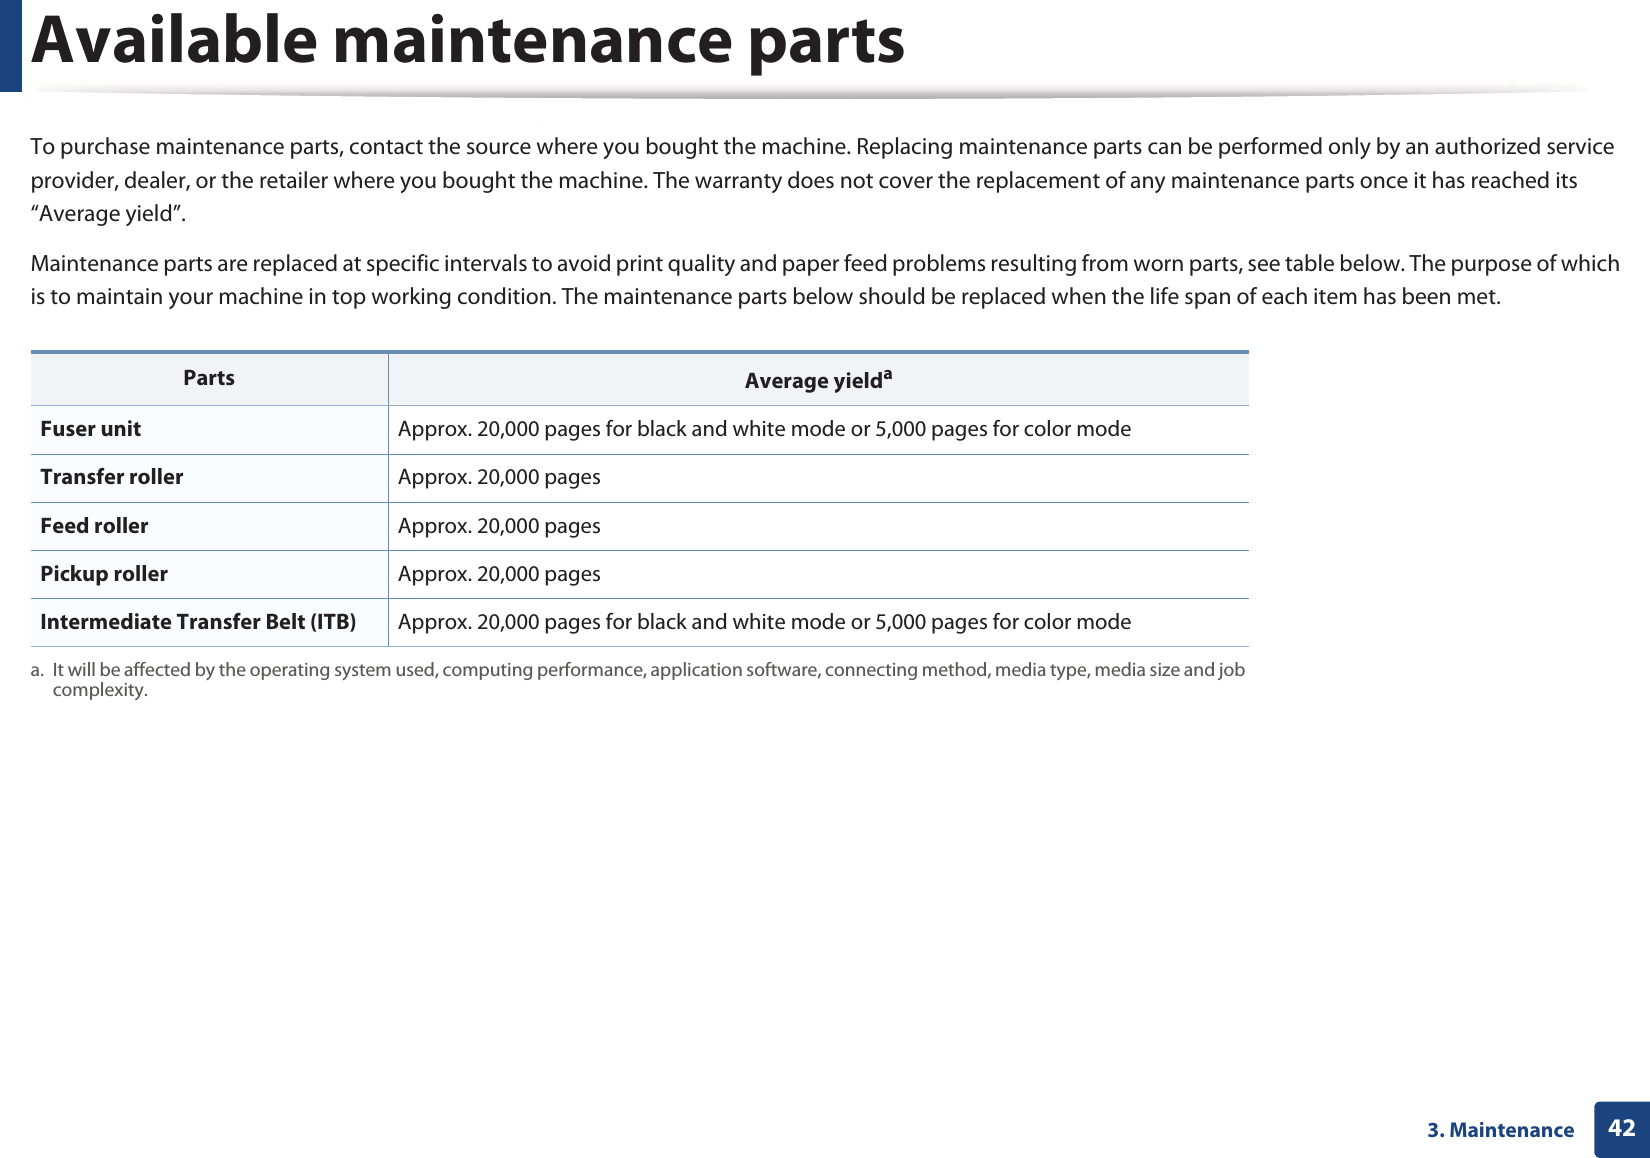 423. MaintenanceAvailable maintenance partsTo purchase maintenance parts, contact the source where you bought the machine. Replacing maintenance parts can be performed only by an authorized service provider, dealer, or the retailer where you bought the machine. The warranty does not cover the replacement of any maintenance parts once it has reached its “Average yield”.Maintenance parts are replaced at specific intervals to avoid print quality and paper feed problems resulting from worn parts, see table below. The purpose of which is to maintain your machine in top working condition. The maintenance parts below should be replaced when the life span of each item has been met.Parts Average yieldaa. It will be affected by the operating system used, computing performance, application software, connecting method, media type, media size and job complexity.Fuser unit Approx. 20,000 pages for black and white mode or 5,000 pages for color modeTransfer roller Approx. 20,000 pages Feed roller Approx. 20,000 pages Pickup roller Approx. 20,000 pagesIntermediate Transfer Belt (ITB) Approx. 20,000 pages for black and white mode or 5,000 pages for color mode